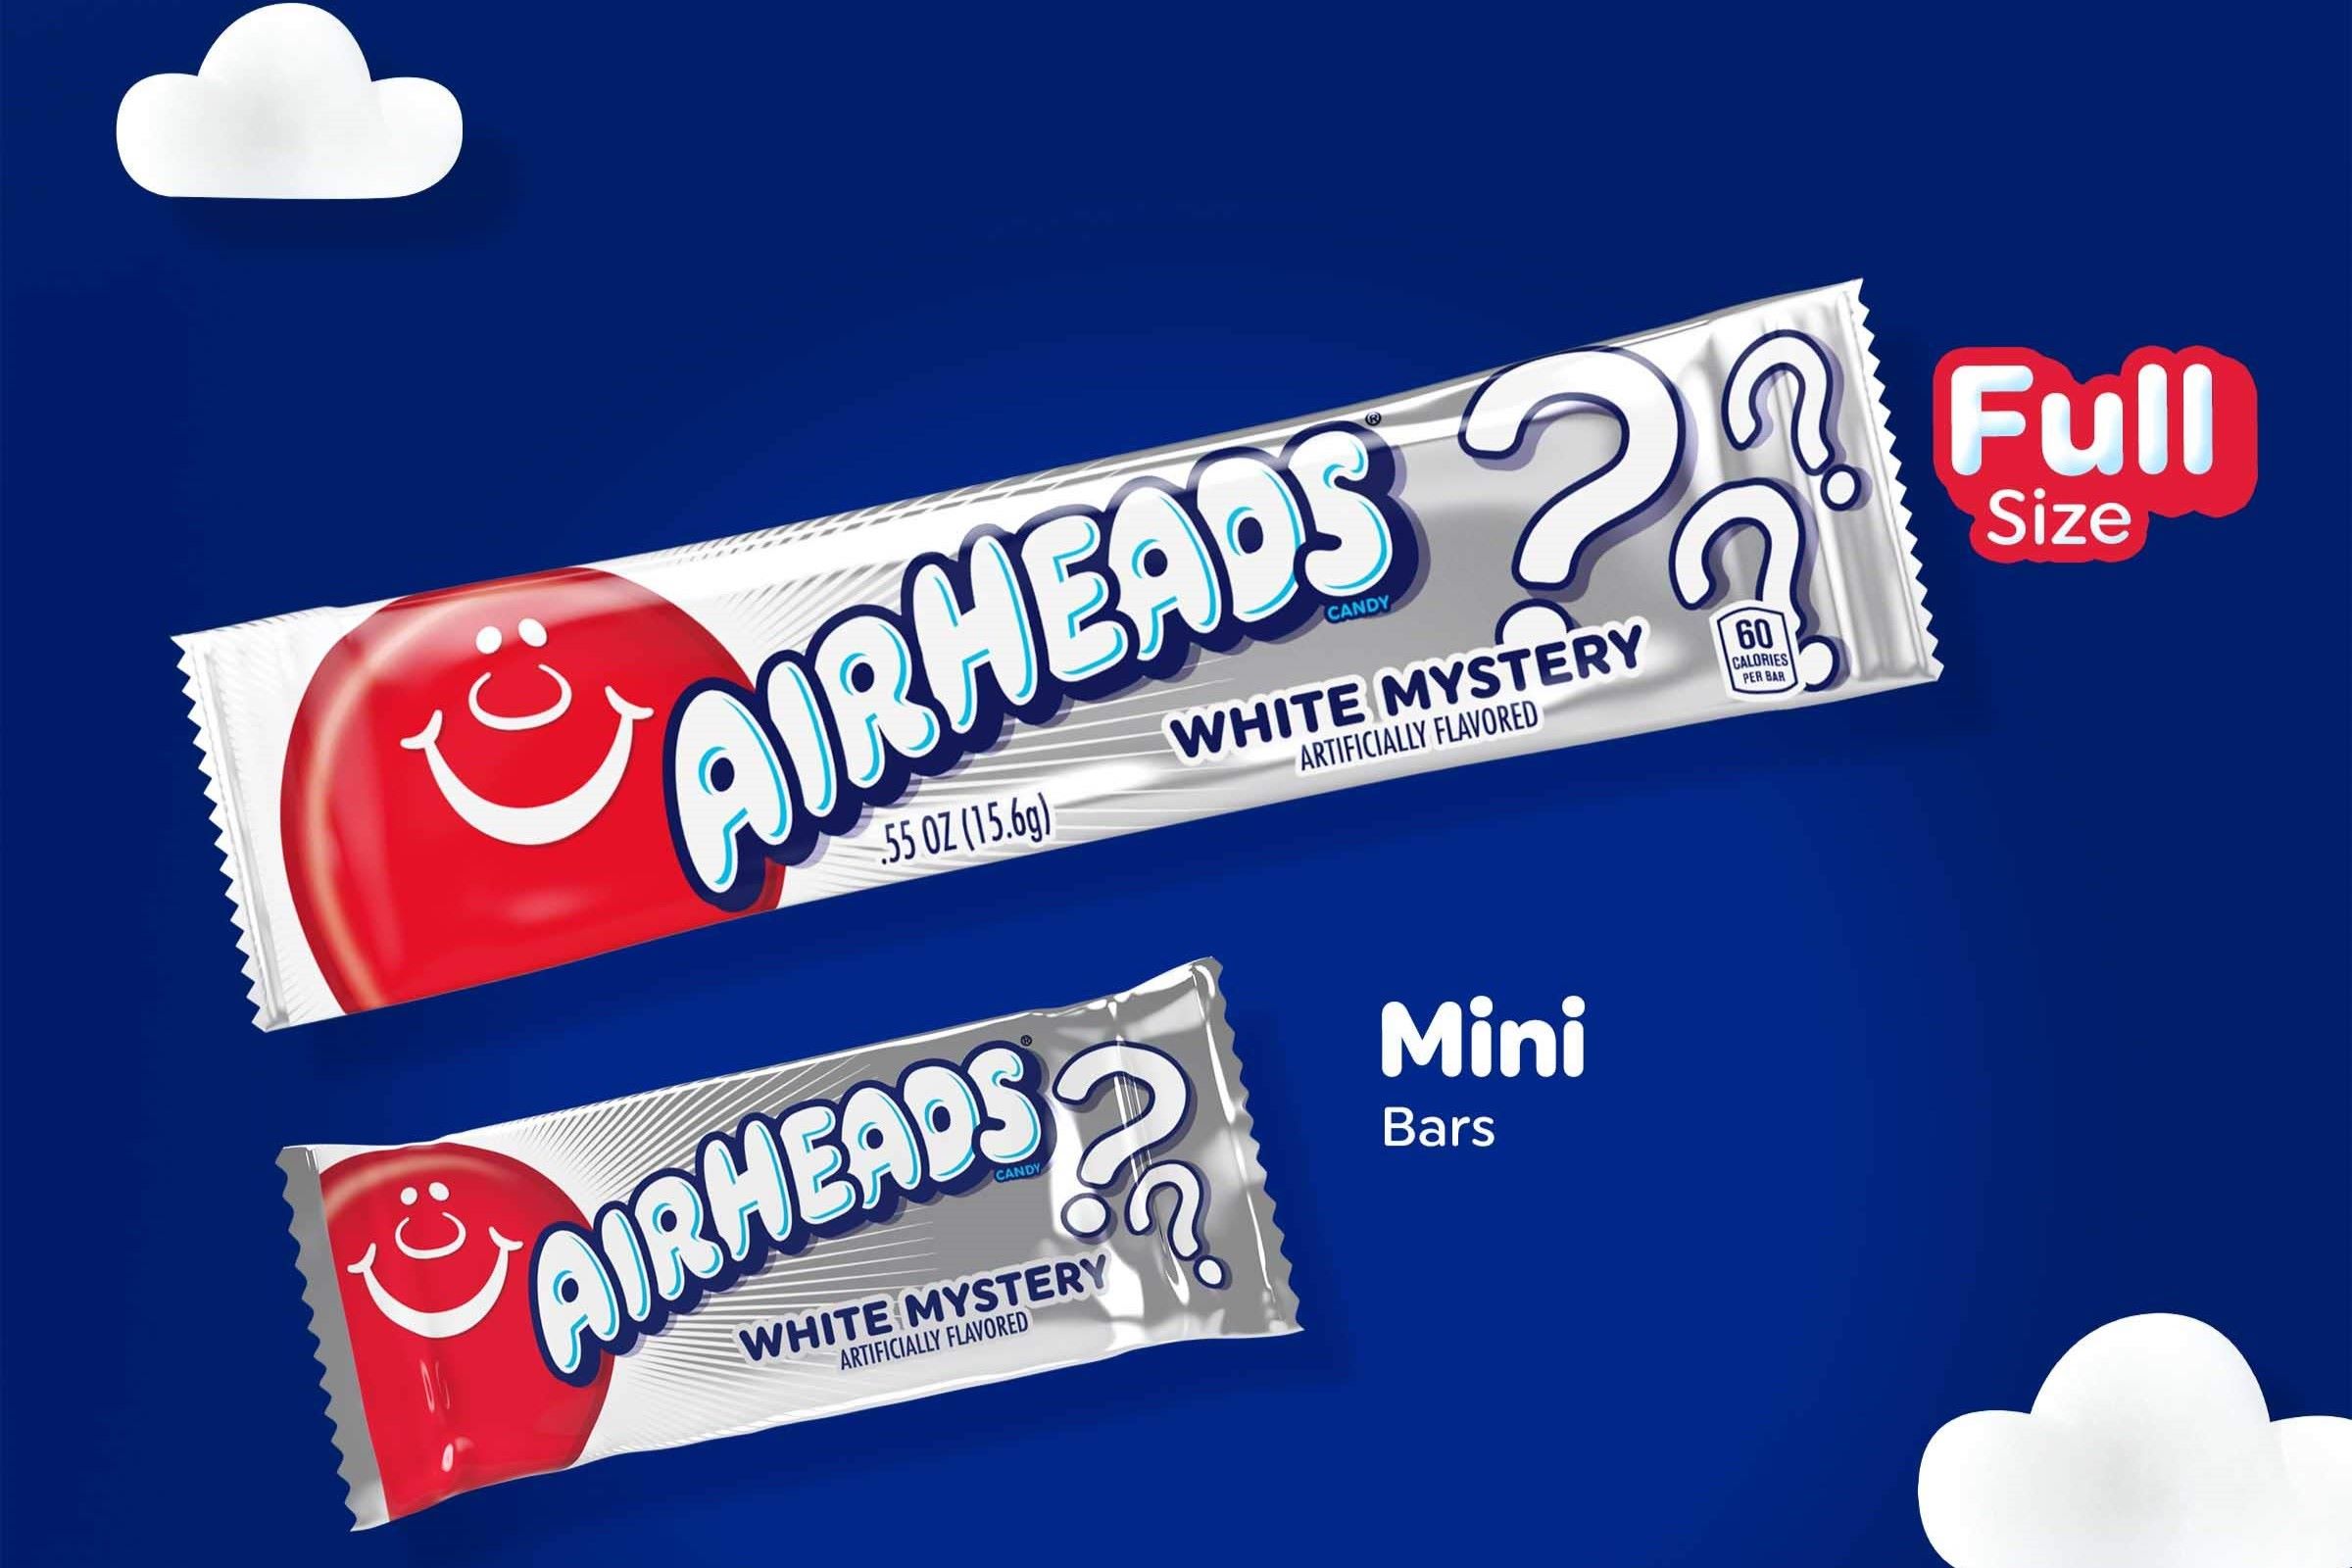 The Untold Secret Of Air Heads' Mystery Flavor Revealed!